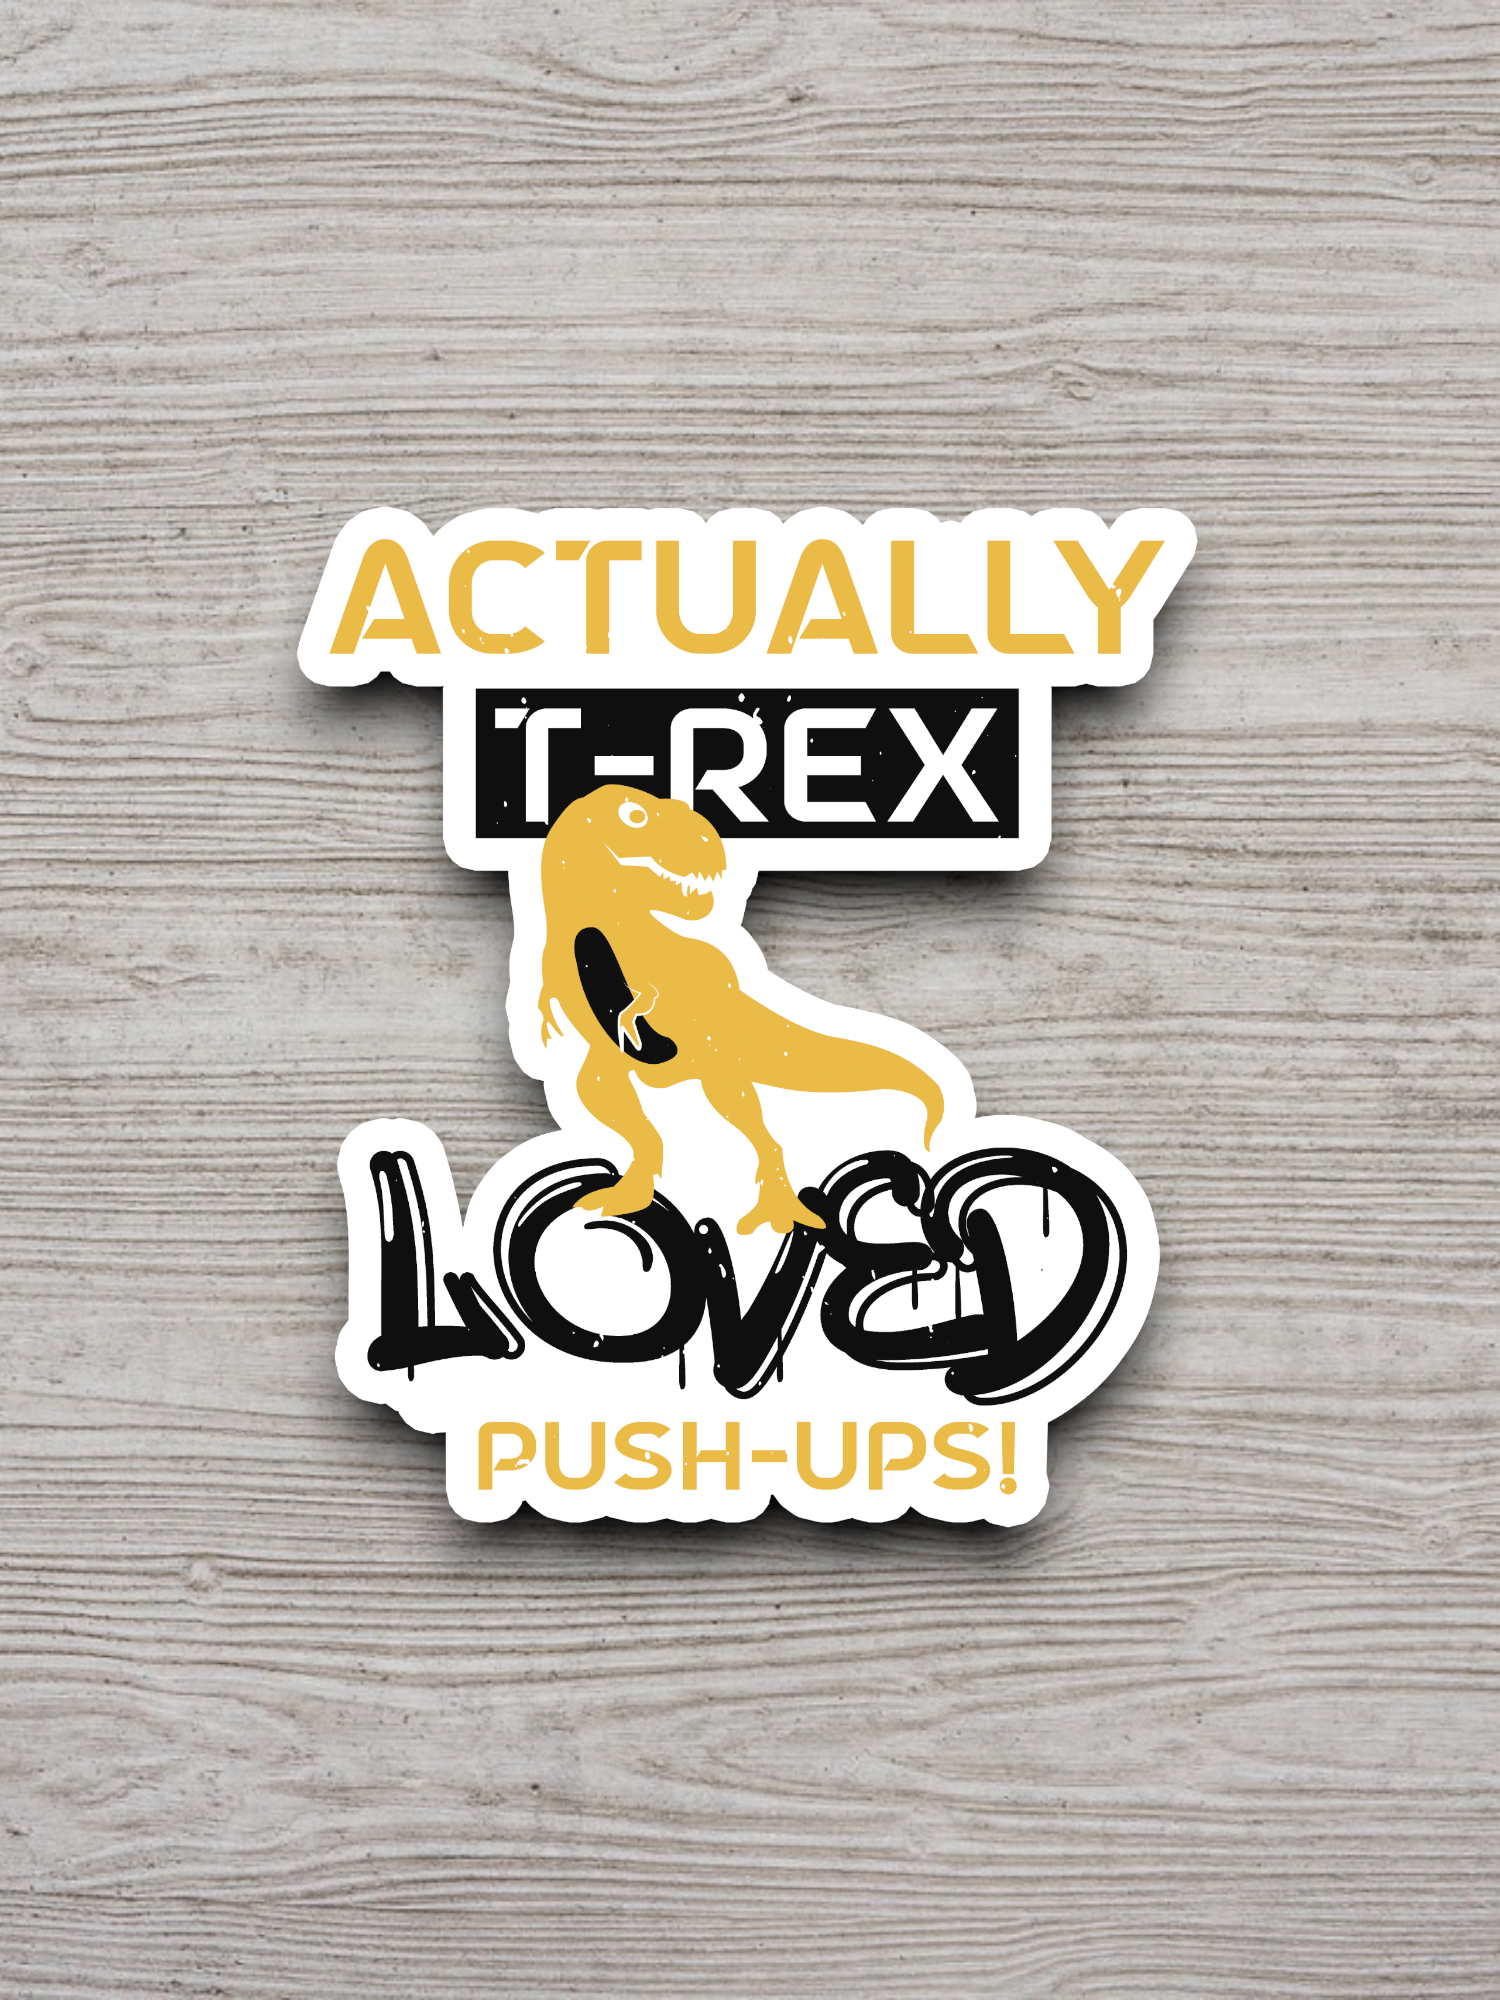 Actually T-Rex Loved Push-Ups Sticker